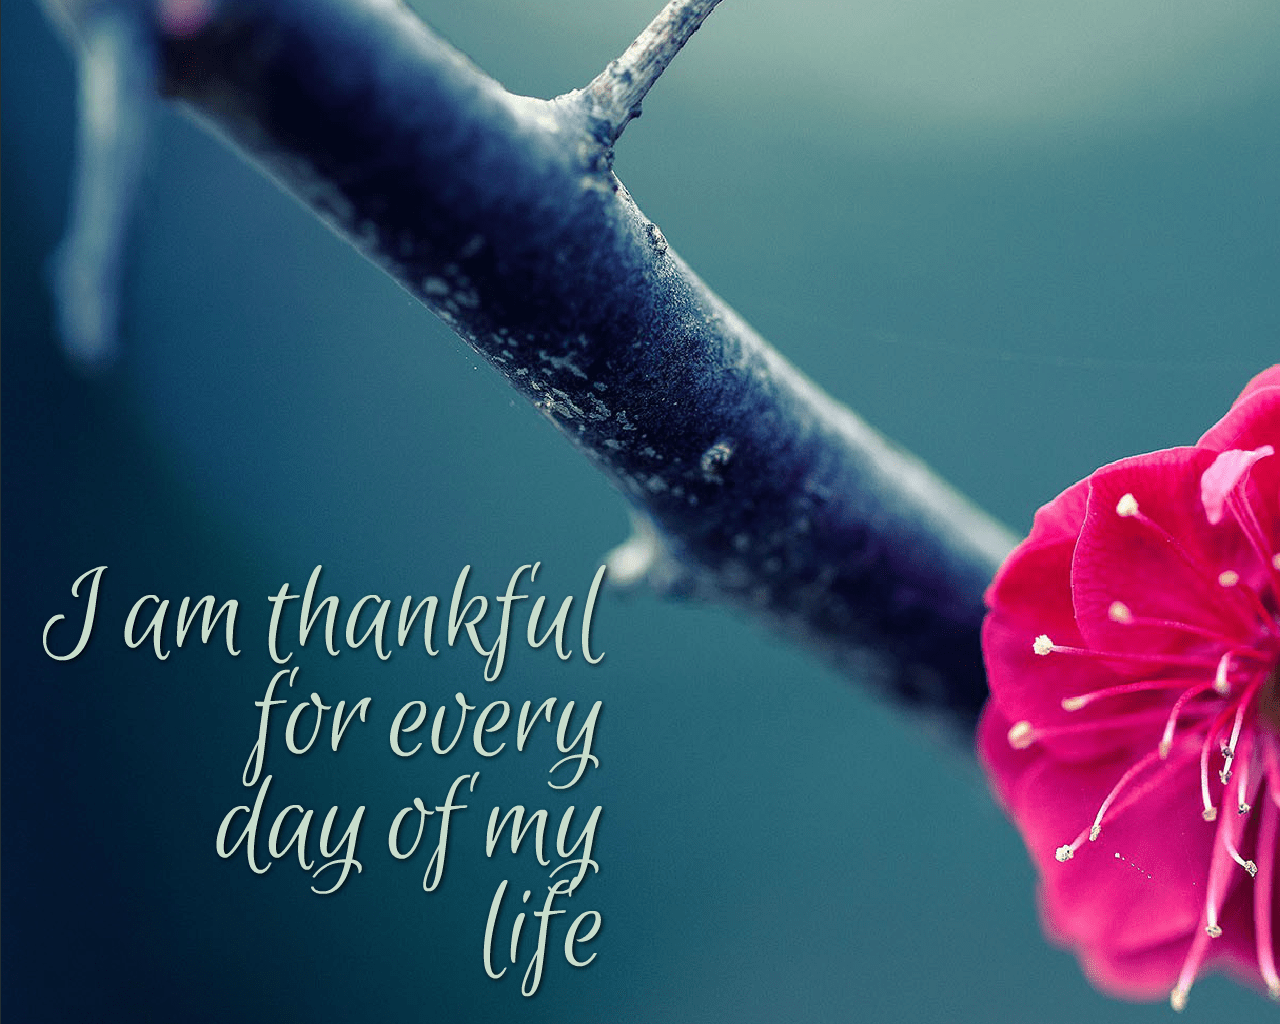 30 Daily Affirmations for Selflove  Free Wallpapers  Be My Travel Muse